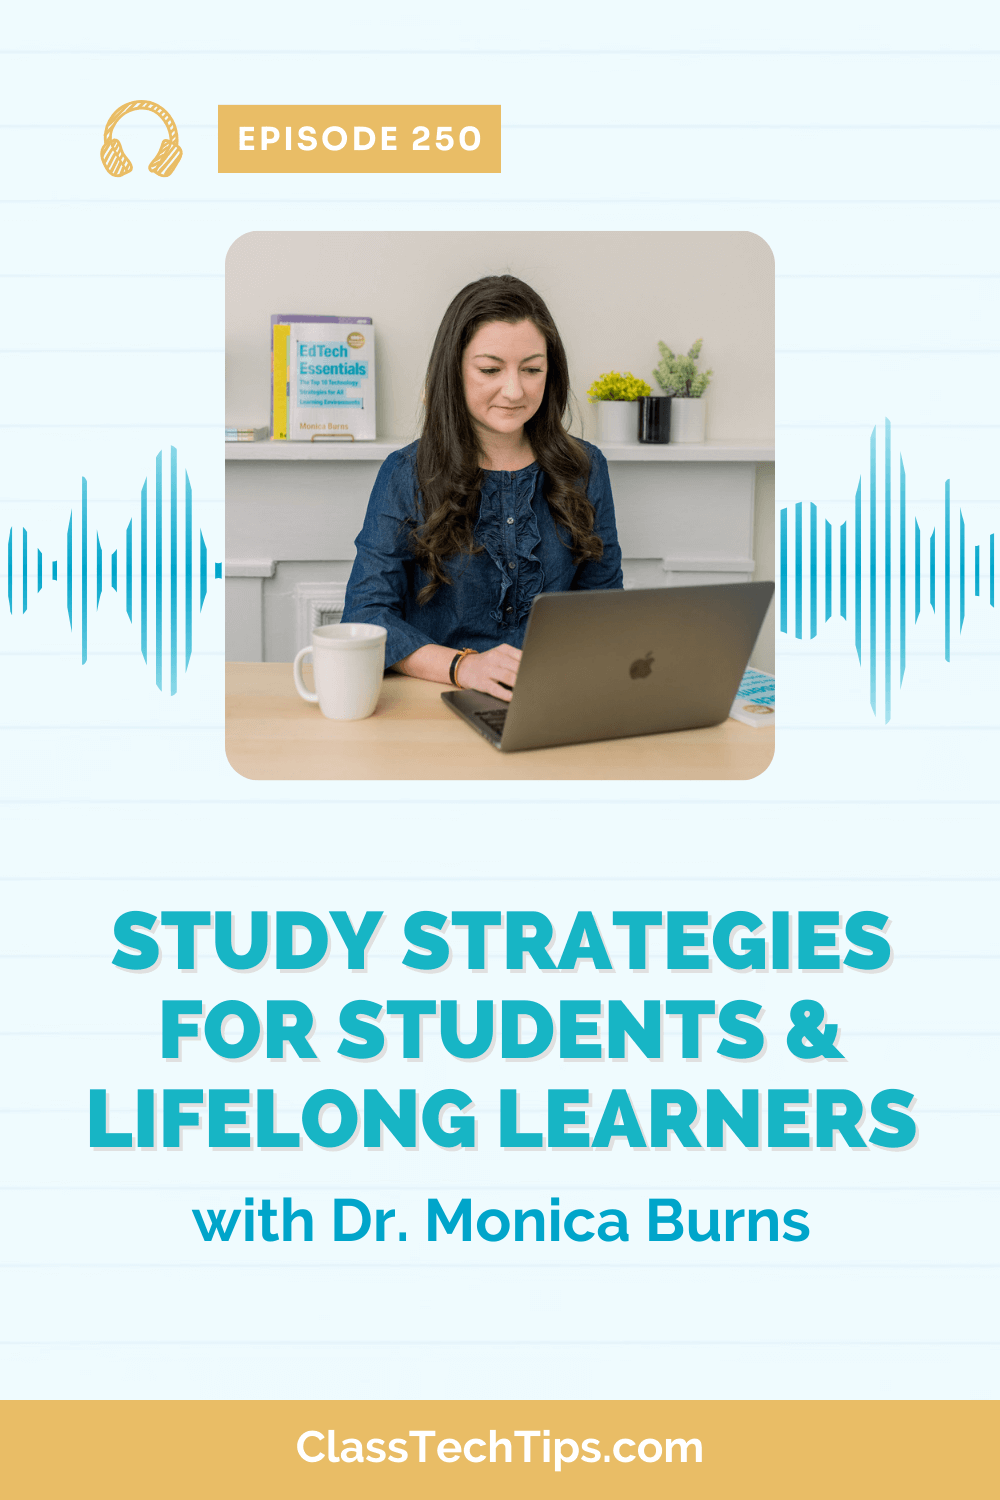 A focused podcast host at her desk, showcasing digital tools and study aids, representing strategies for student and lifelong learning success.